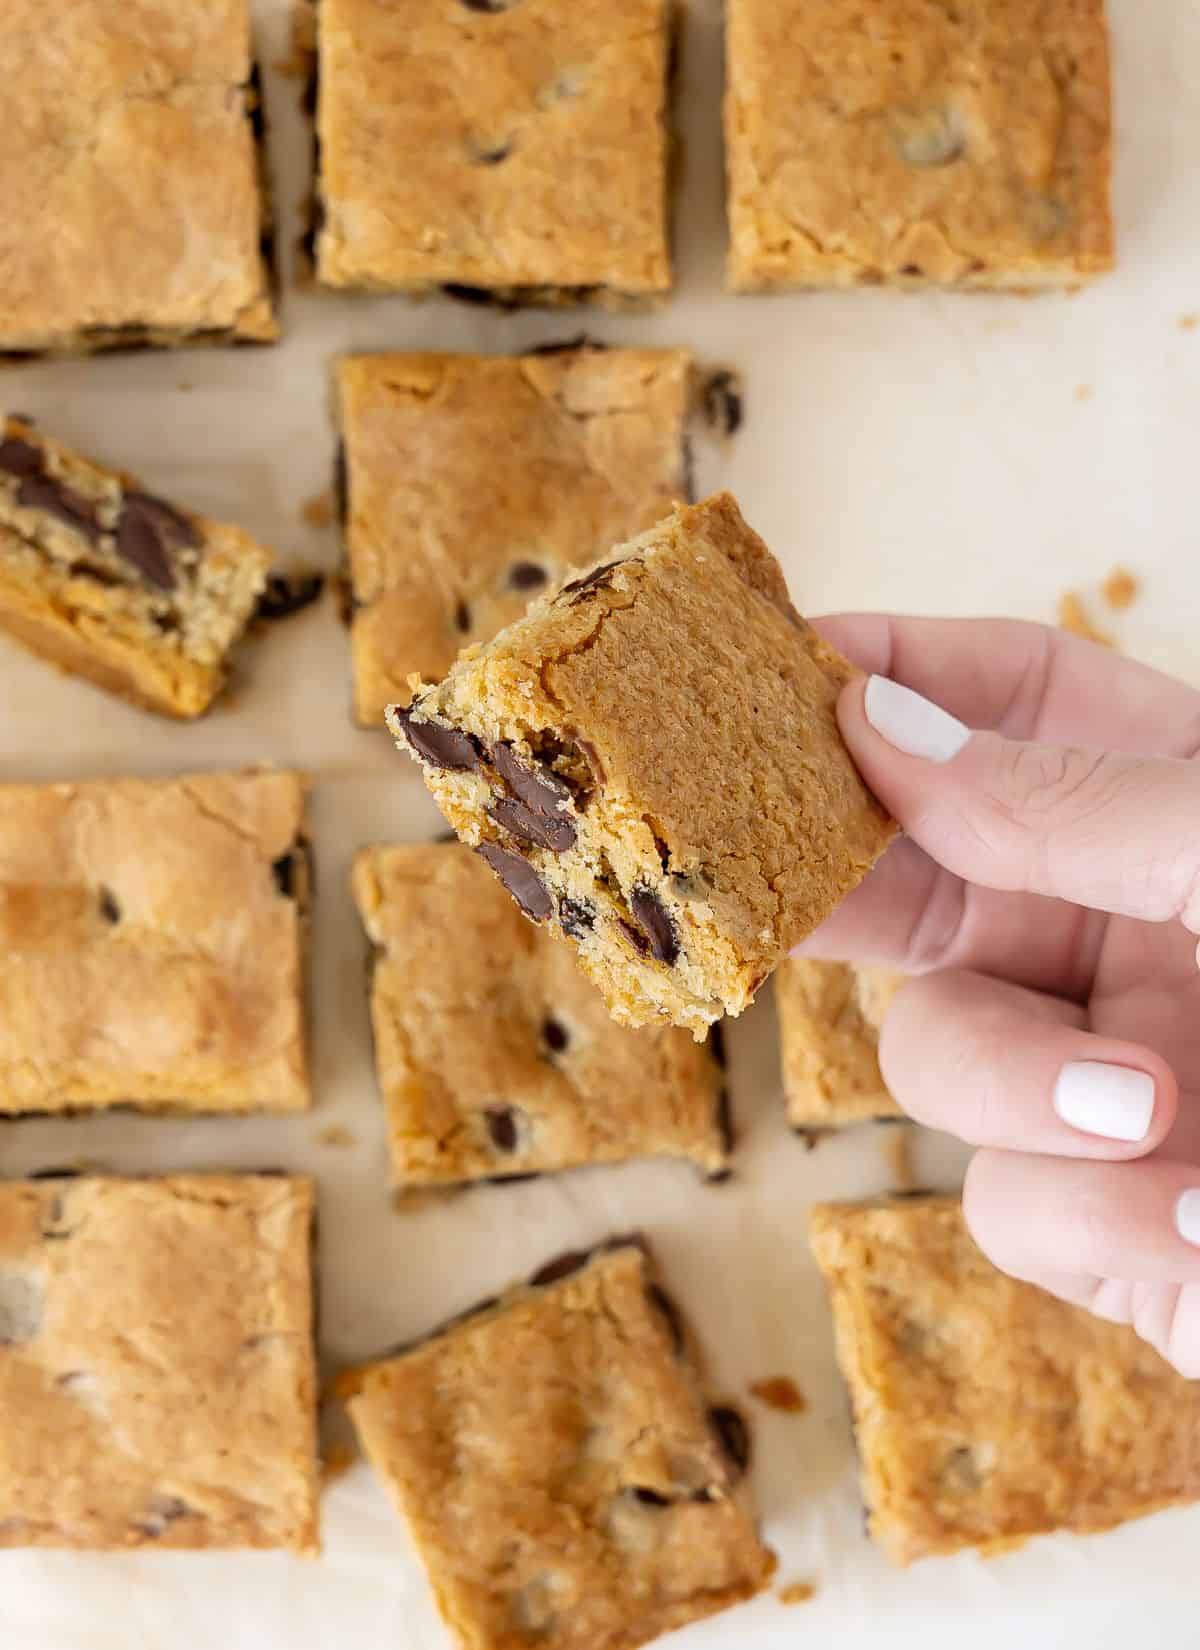 Holding a chocolate chip blondie square with rest of bars below.